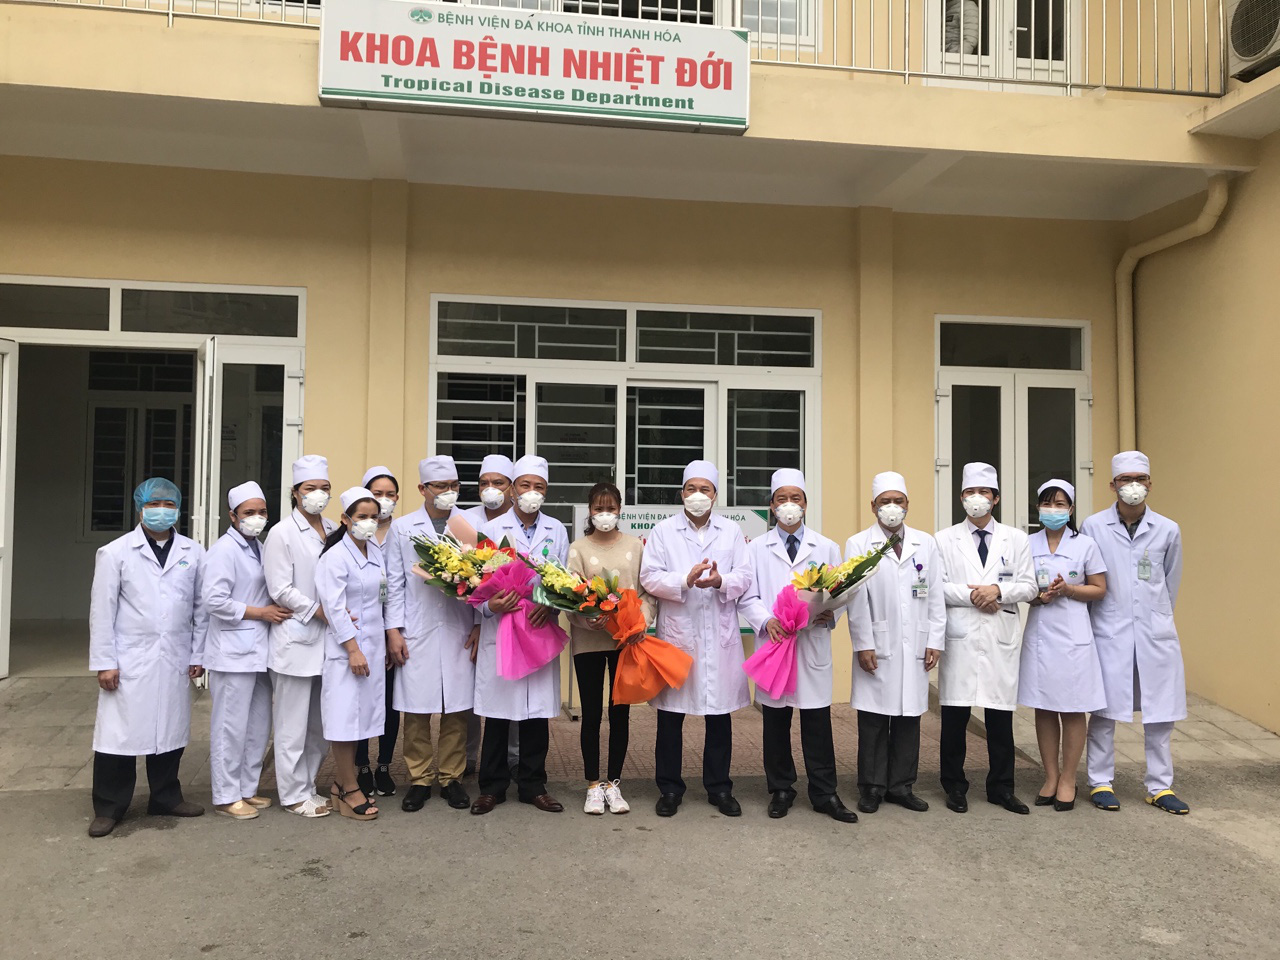 Woman becomes second patient cured of new coronavirus-caused pneumonia in Vietnam